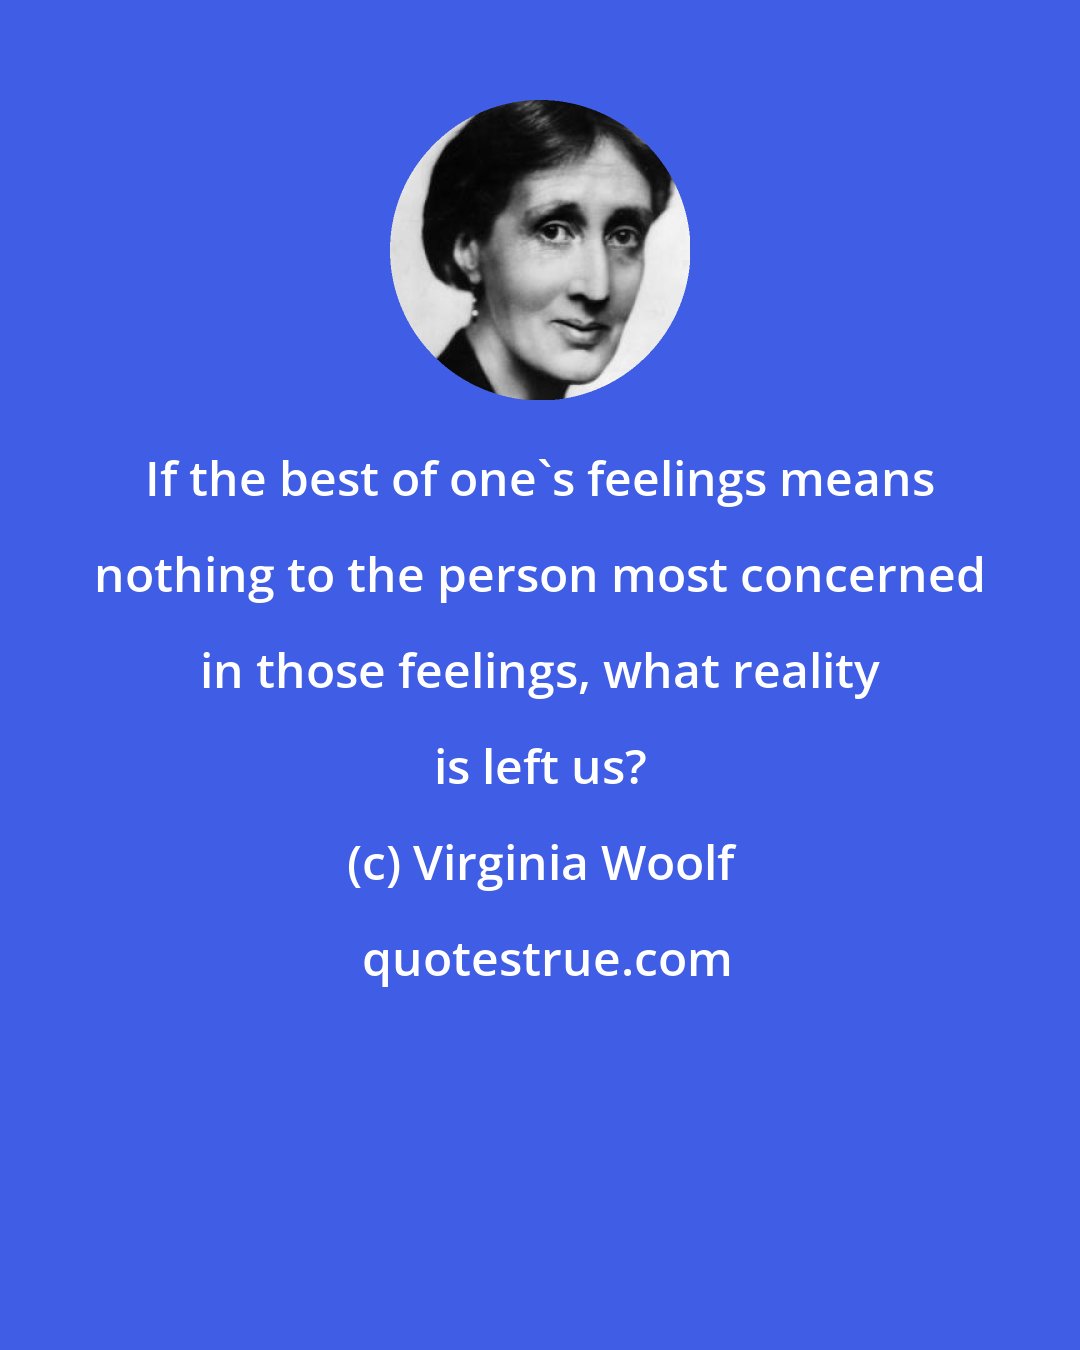 Virginia Woolf: If the best of one's feelings means nothing to the person most concerned in those feelings, what reality is left us?